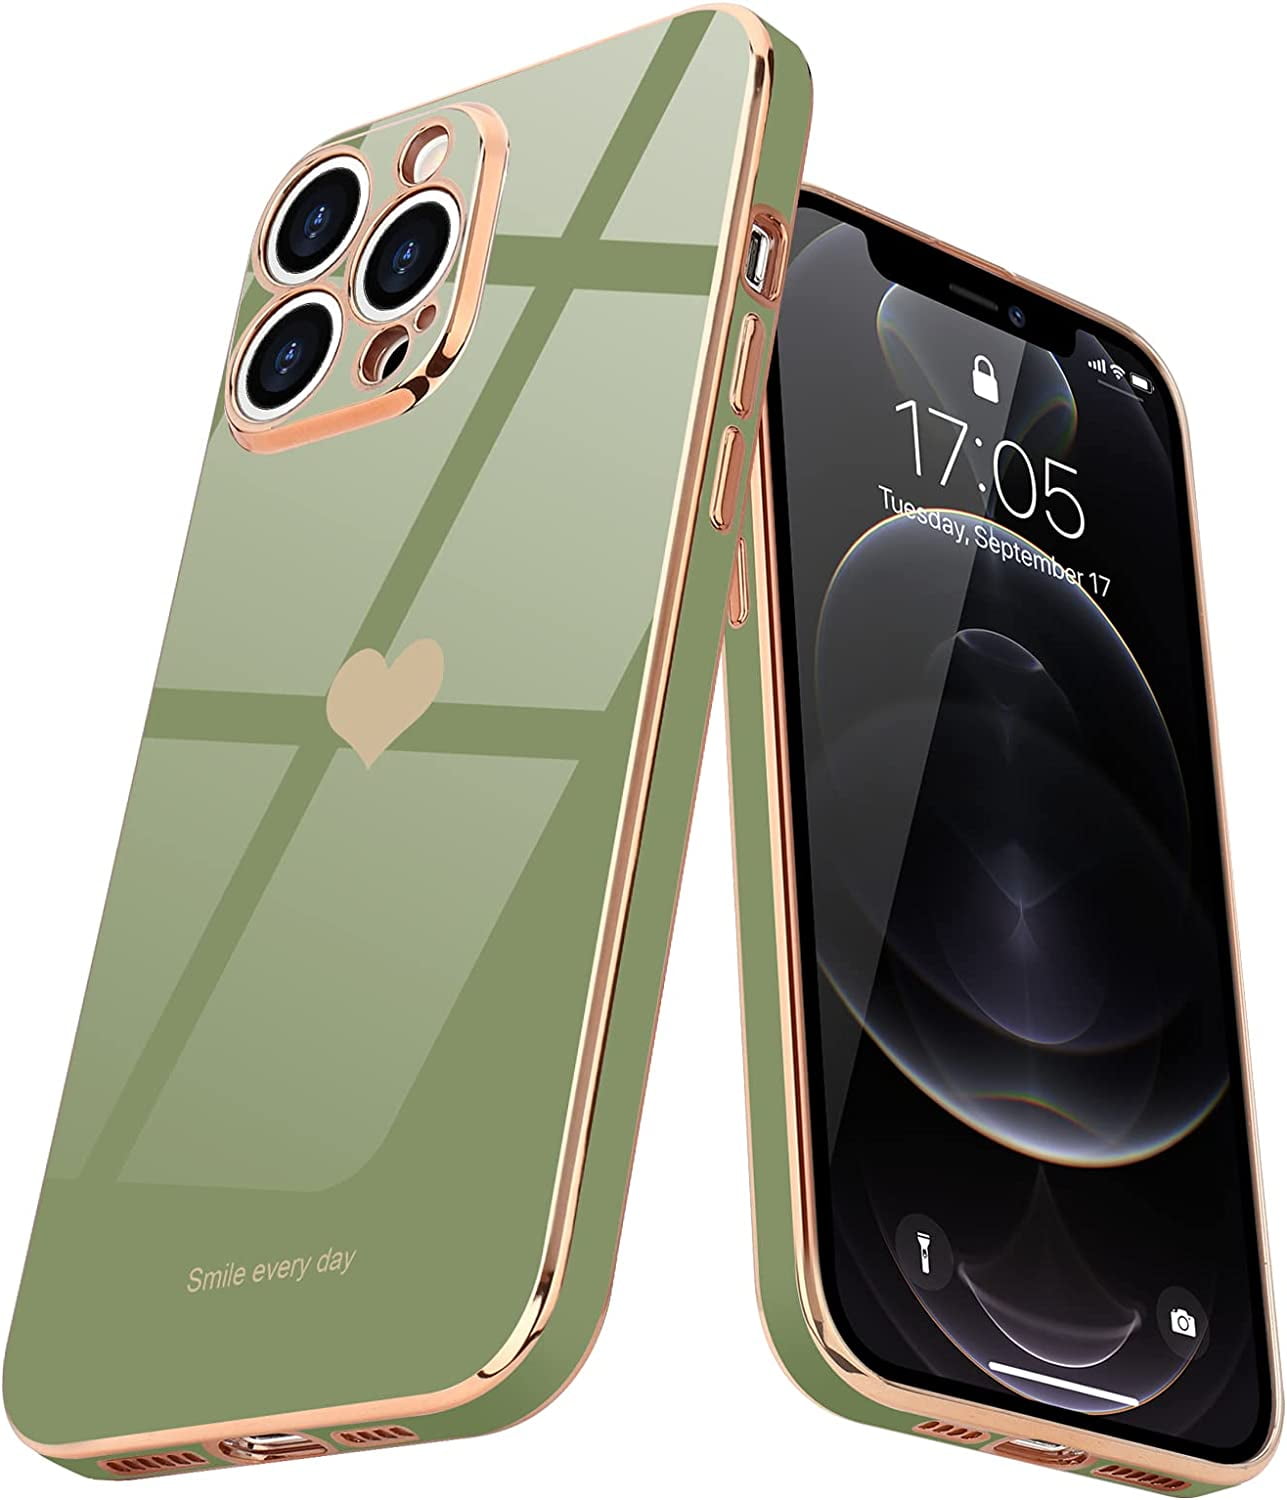  Skyseaco for iPhone 12 Pro Max Case, Cute Plated Love